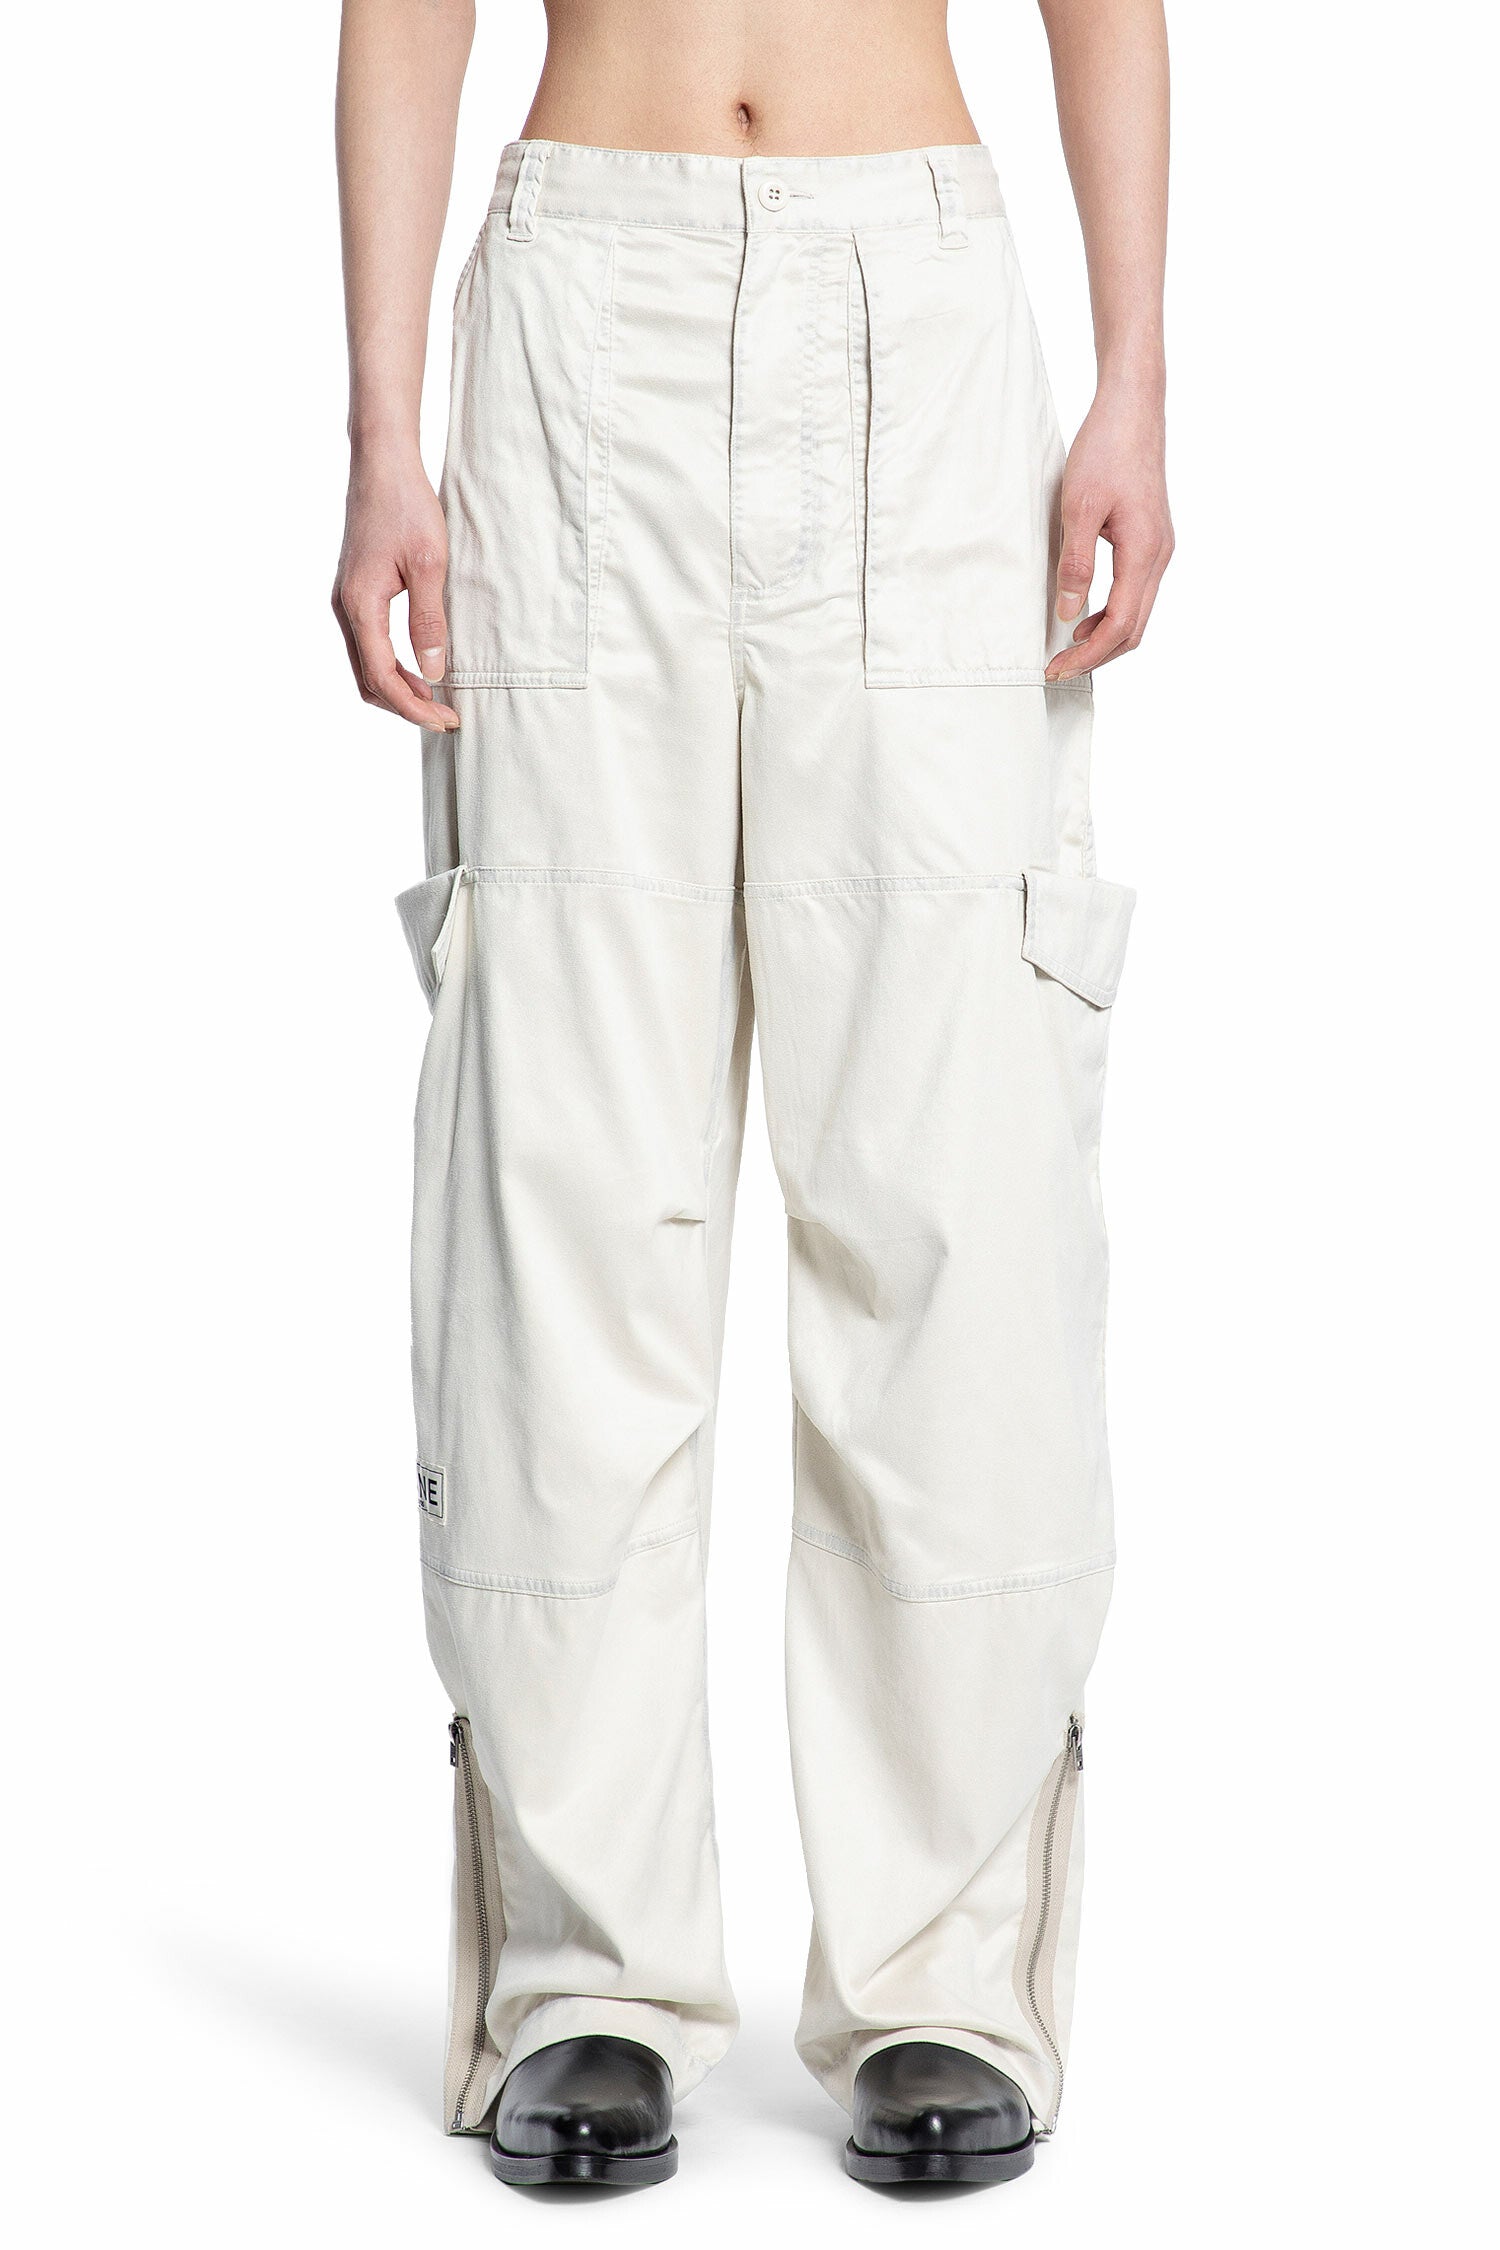 ACNE STUDIOS MAN OFF-WHITE TROUSERS